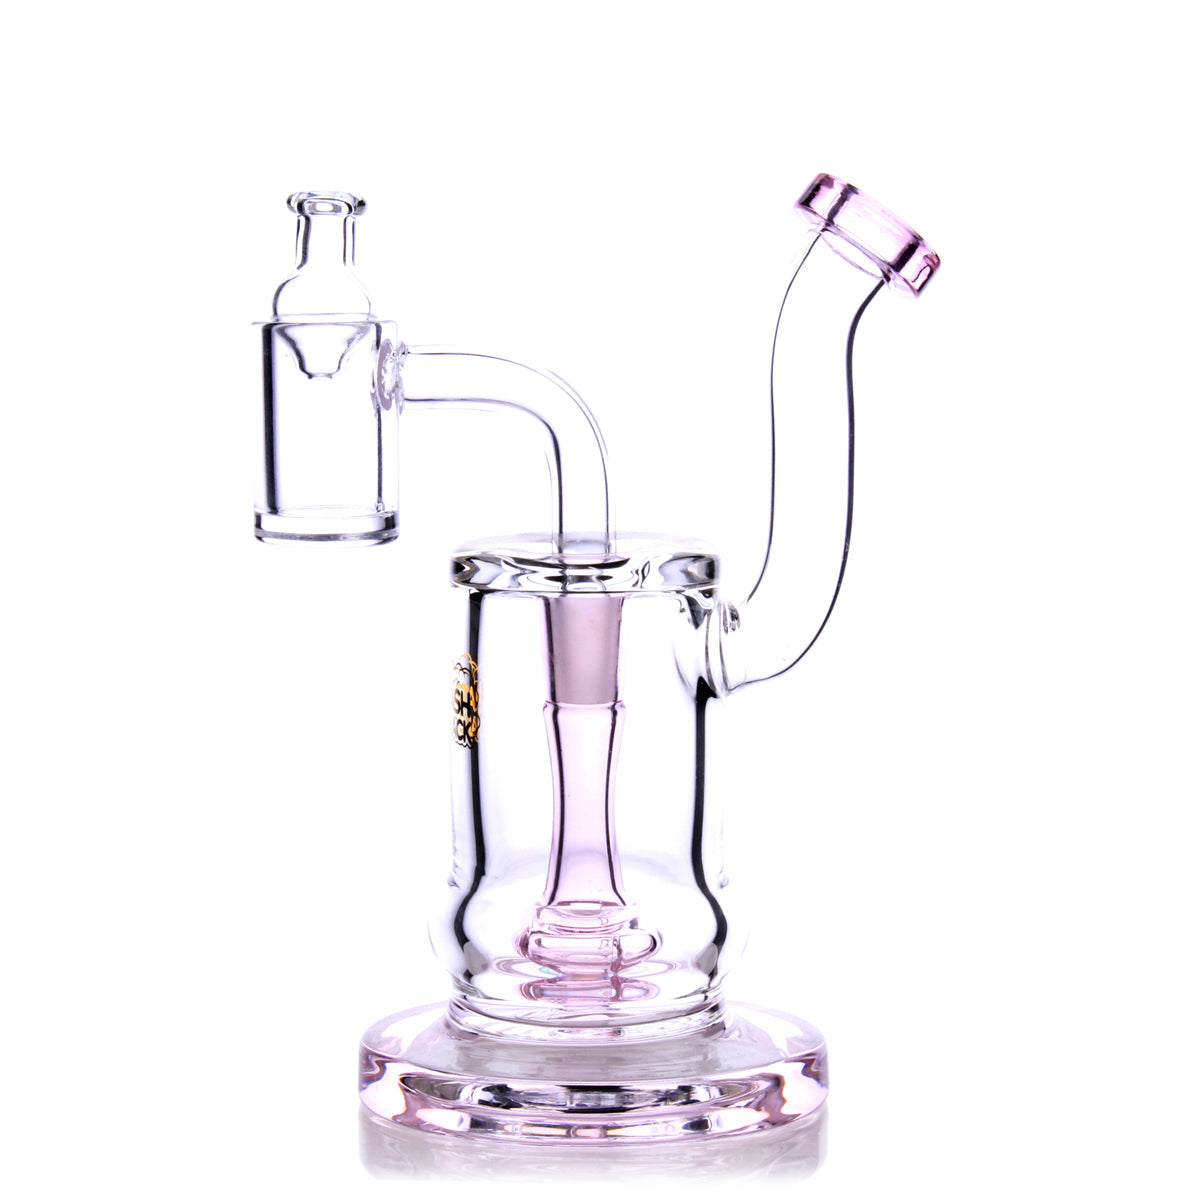 HydroBarrel Mini Rig in Pink by The Stash Shack, 5" Tall with Showerhead Percolator, 90 Degree Joint